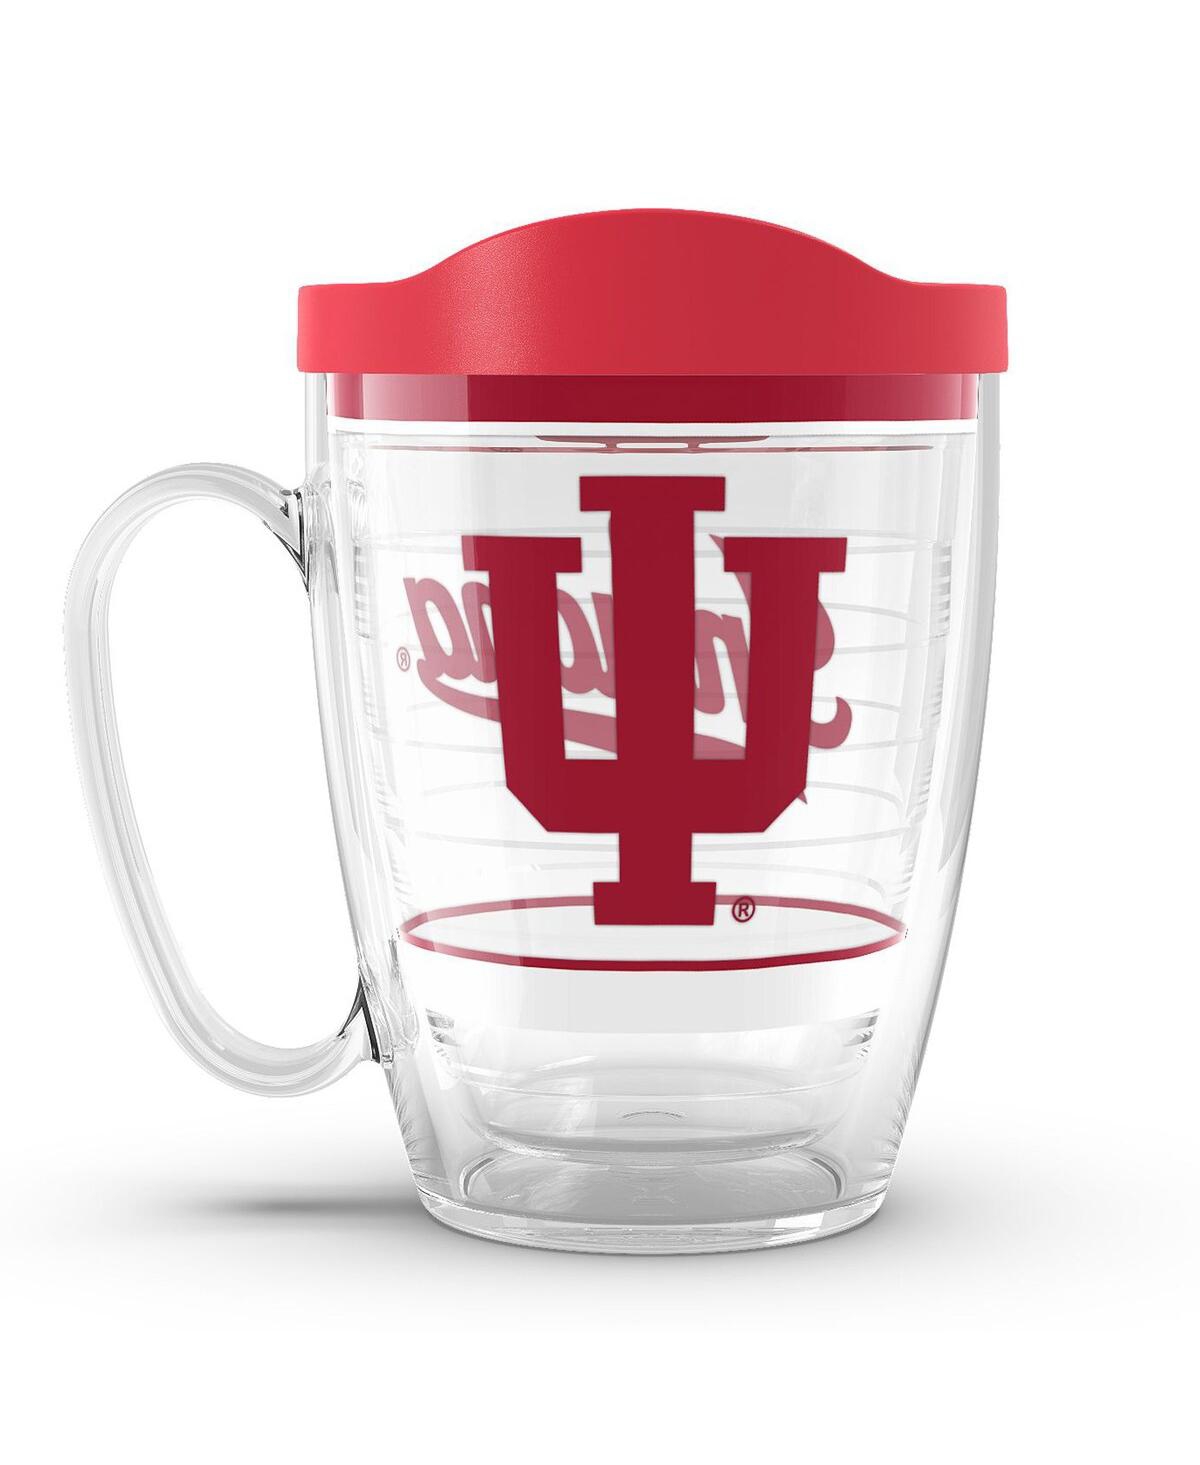 Tervis Tumbler Indiana Hoosiers 16 oz Tradition Classic Mug In Red